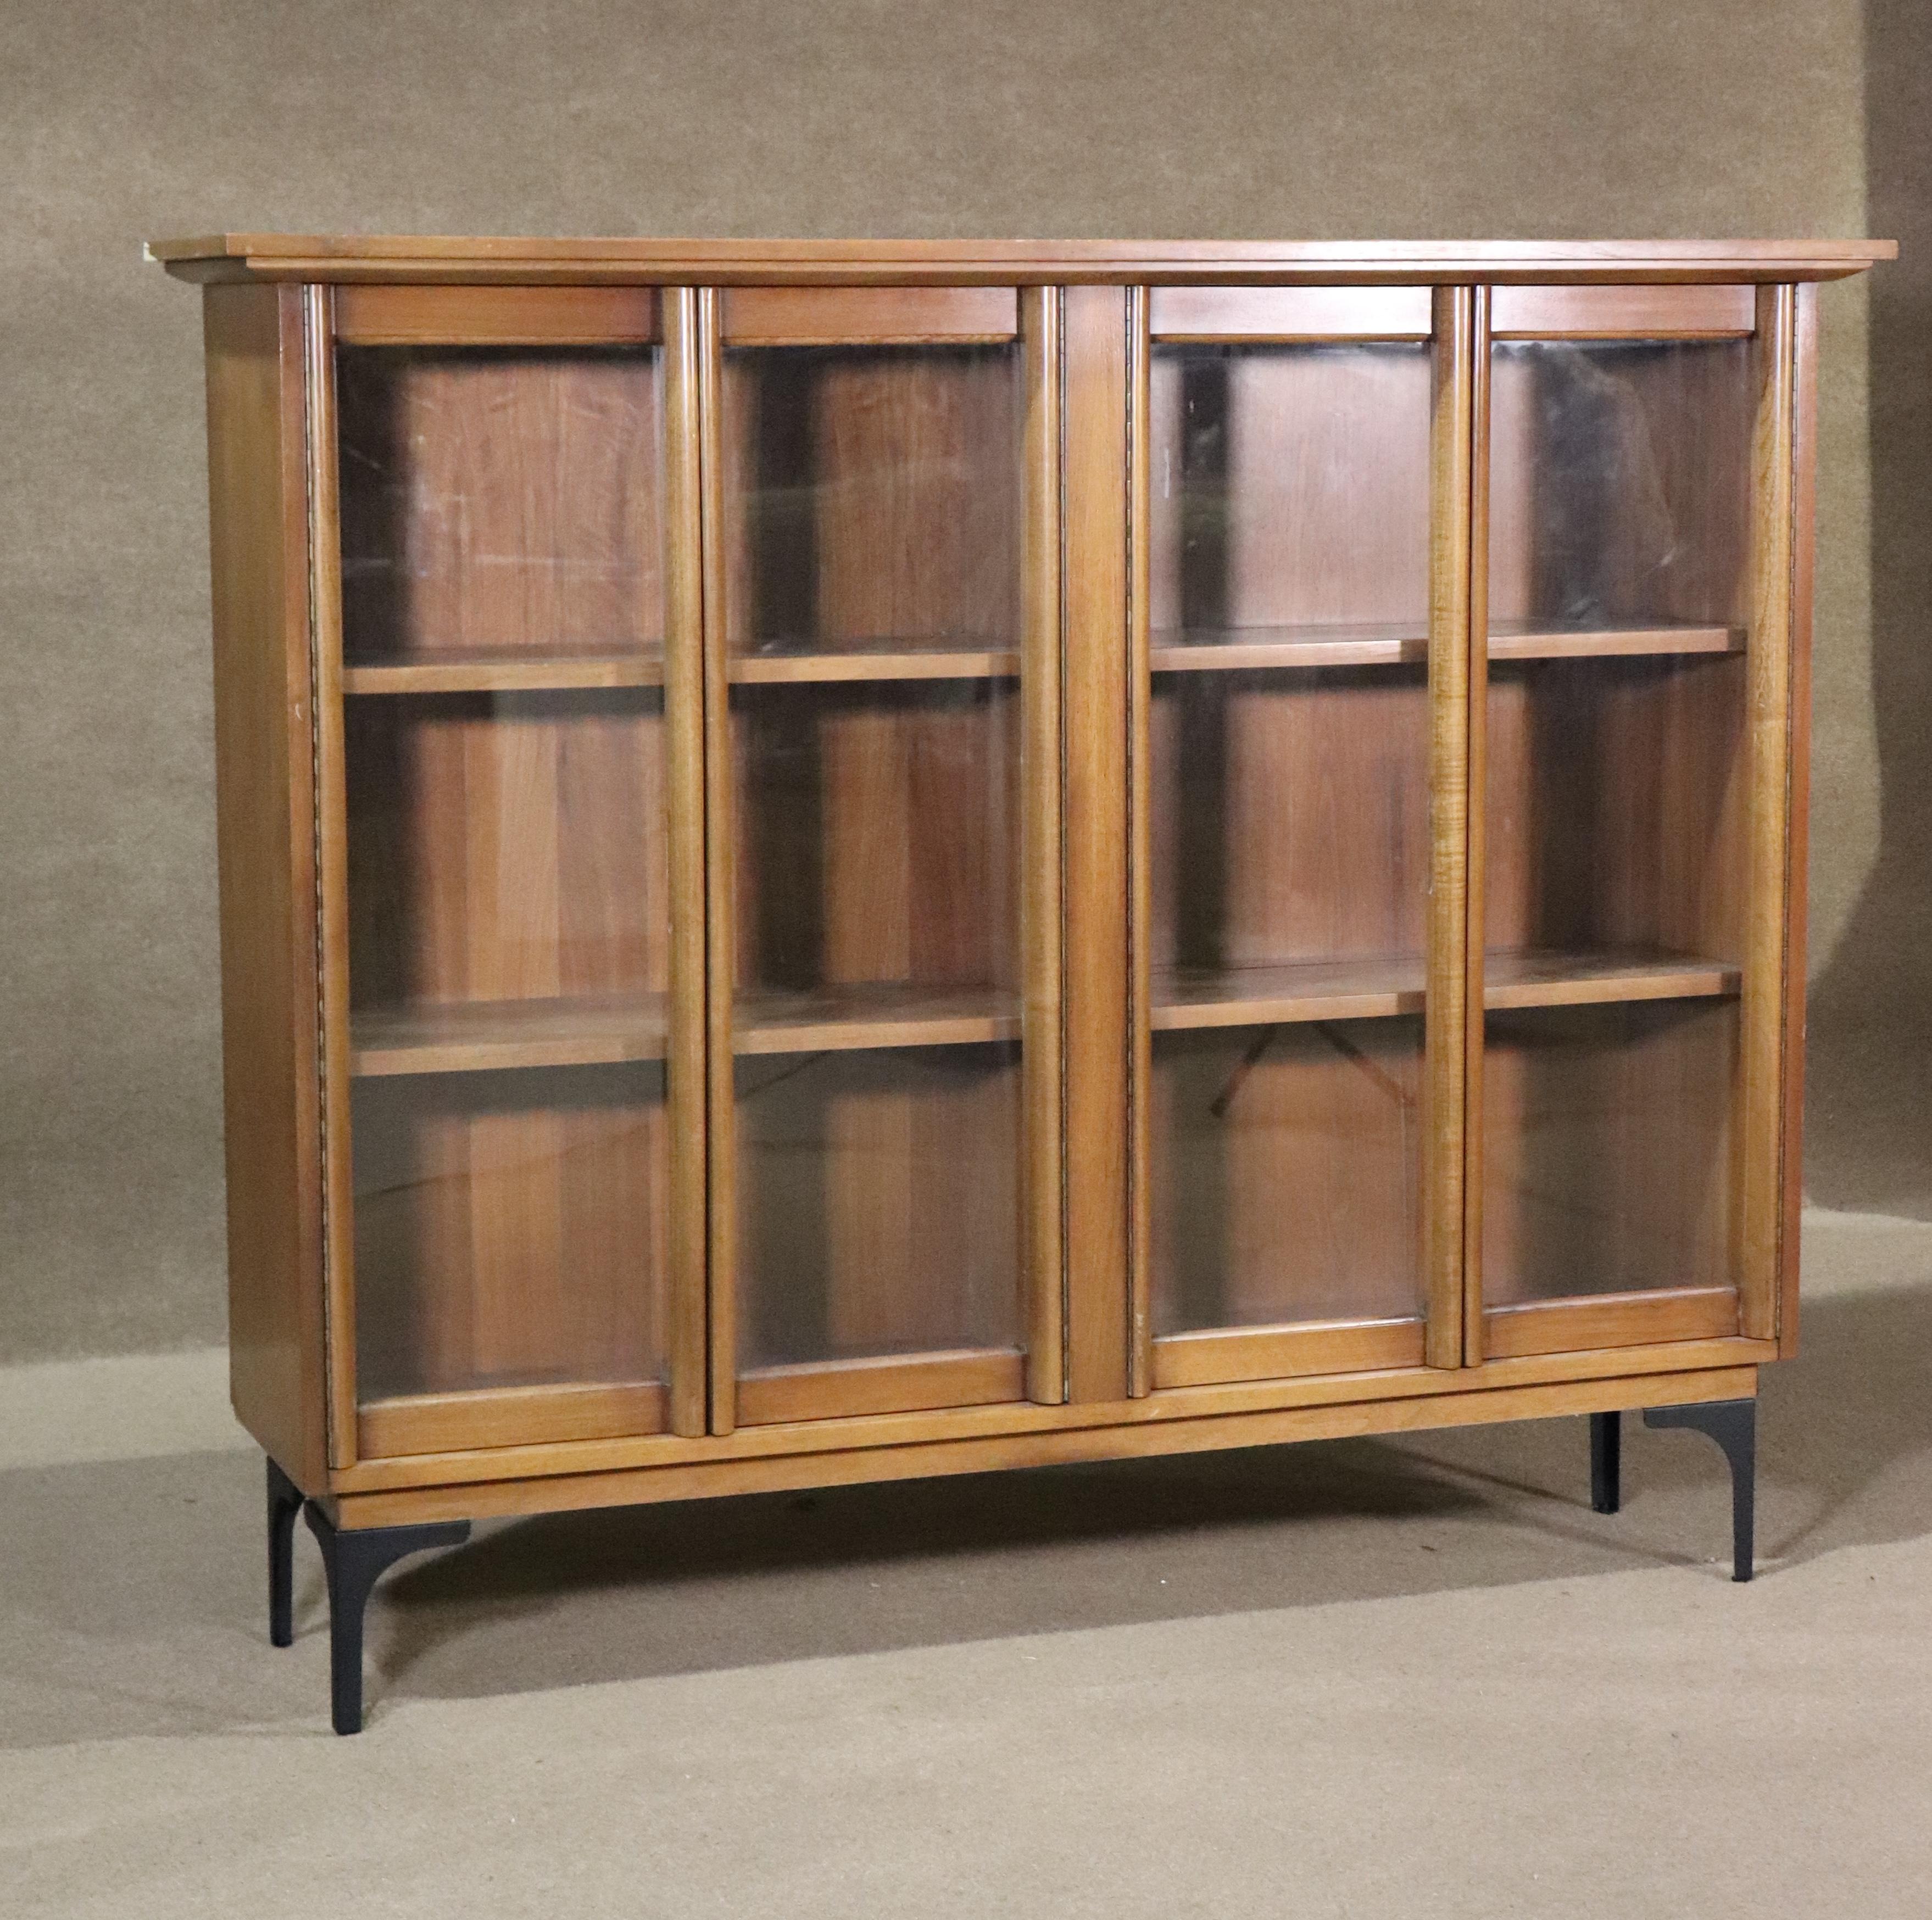 Standing mid-century modern cabinet with shelving. Four glass doors enclose the display cabinet.
Please confirm location NY or NJ